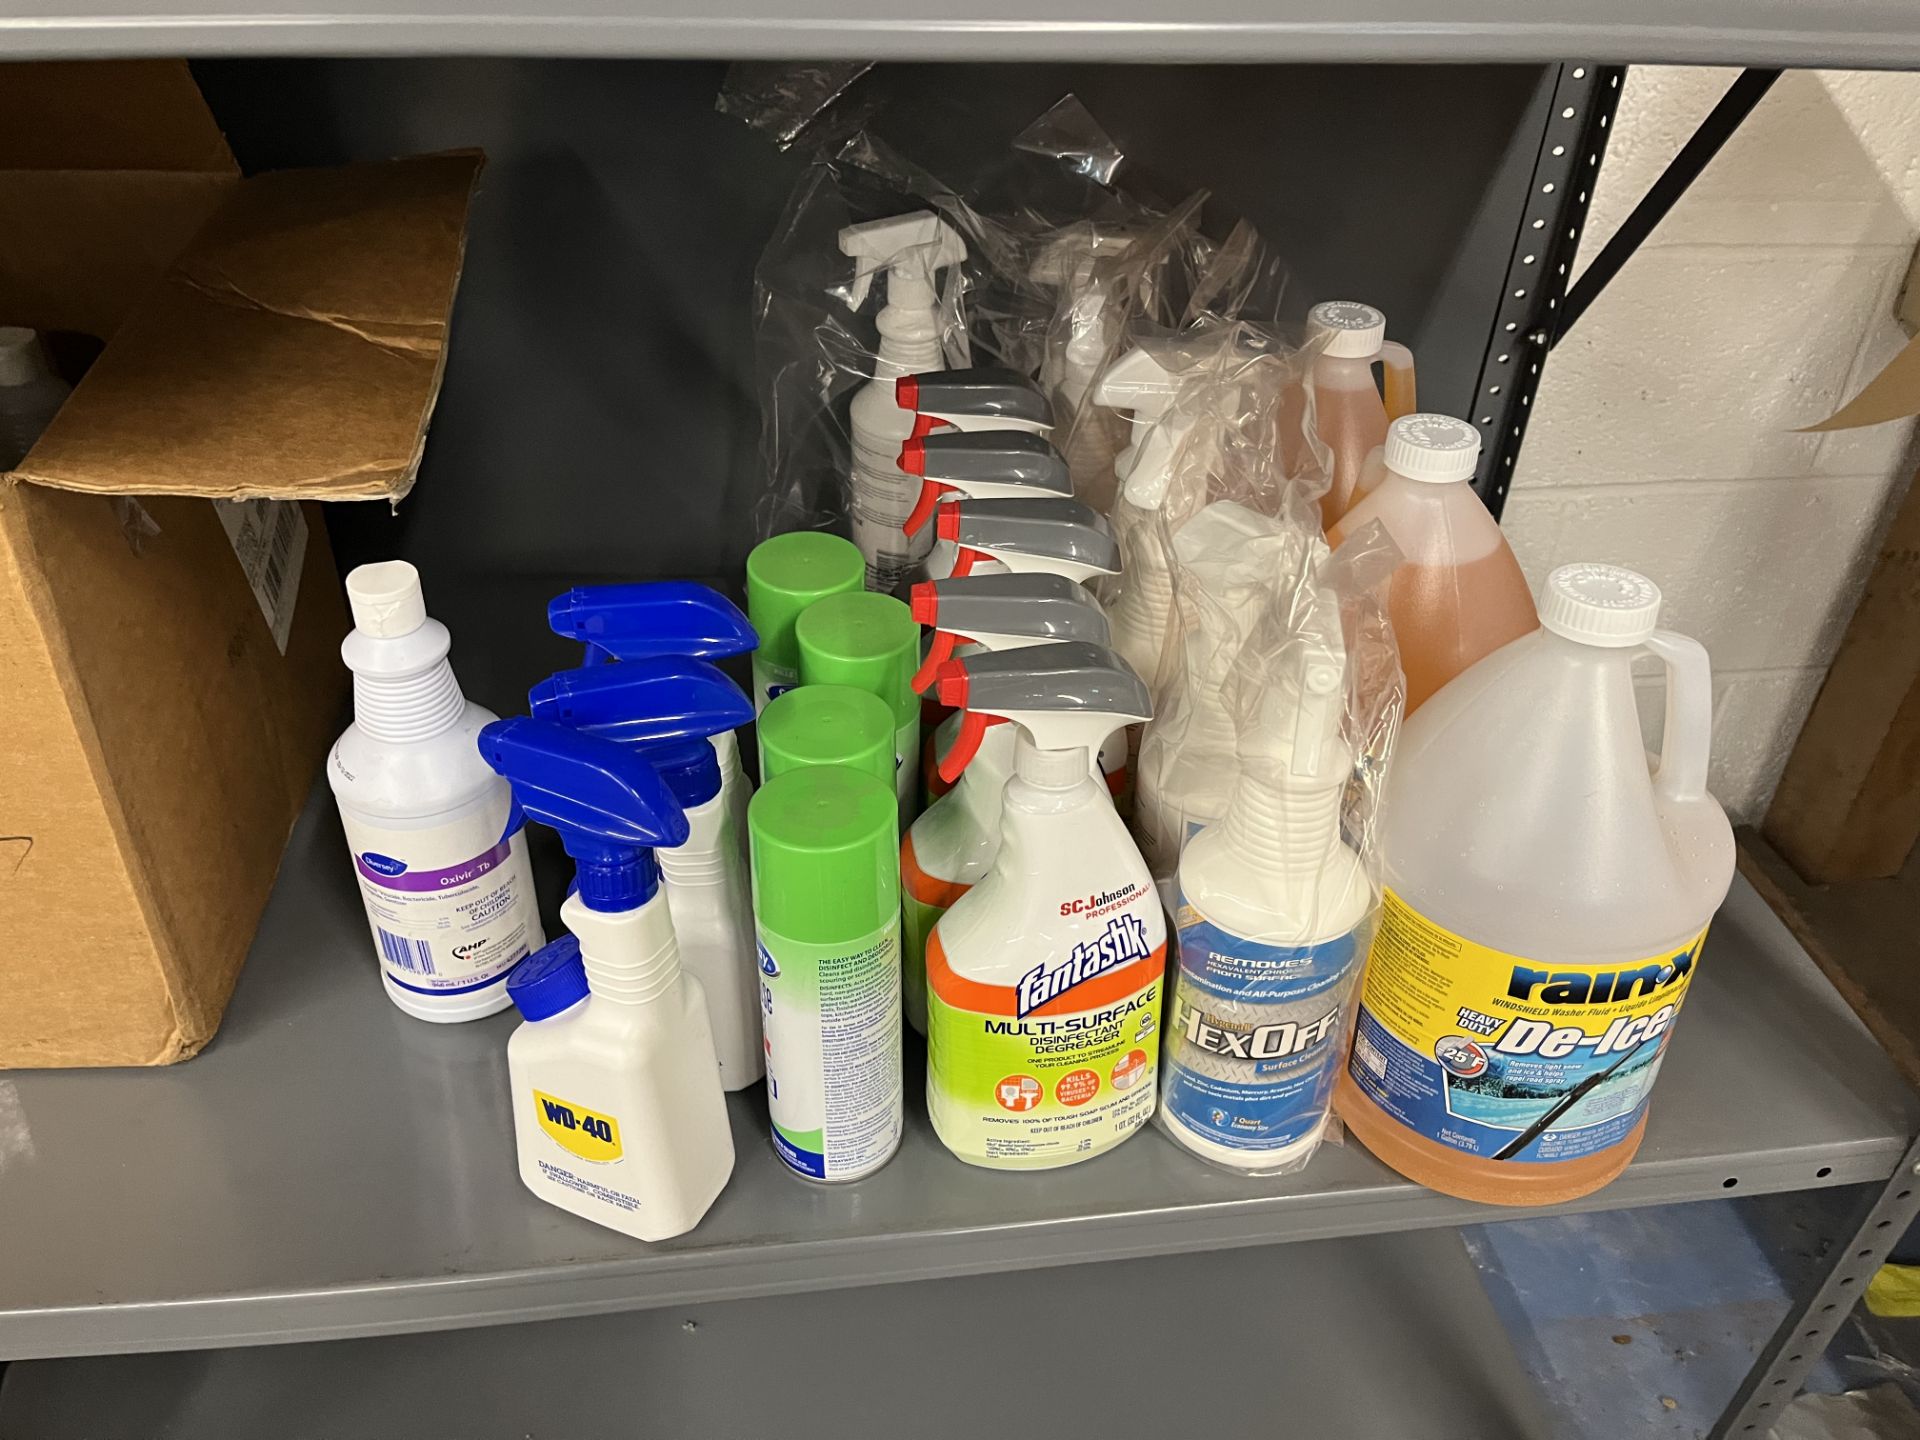 LOT: Rack, Cleaning products, tyvek suit, first aid kits - Image 3 of 3